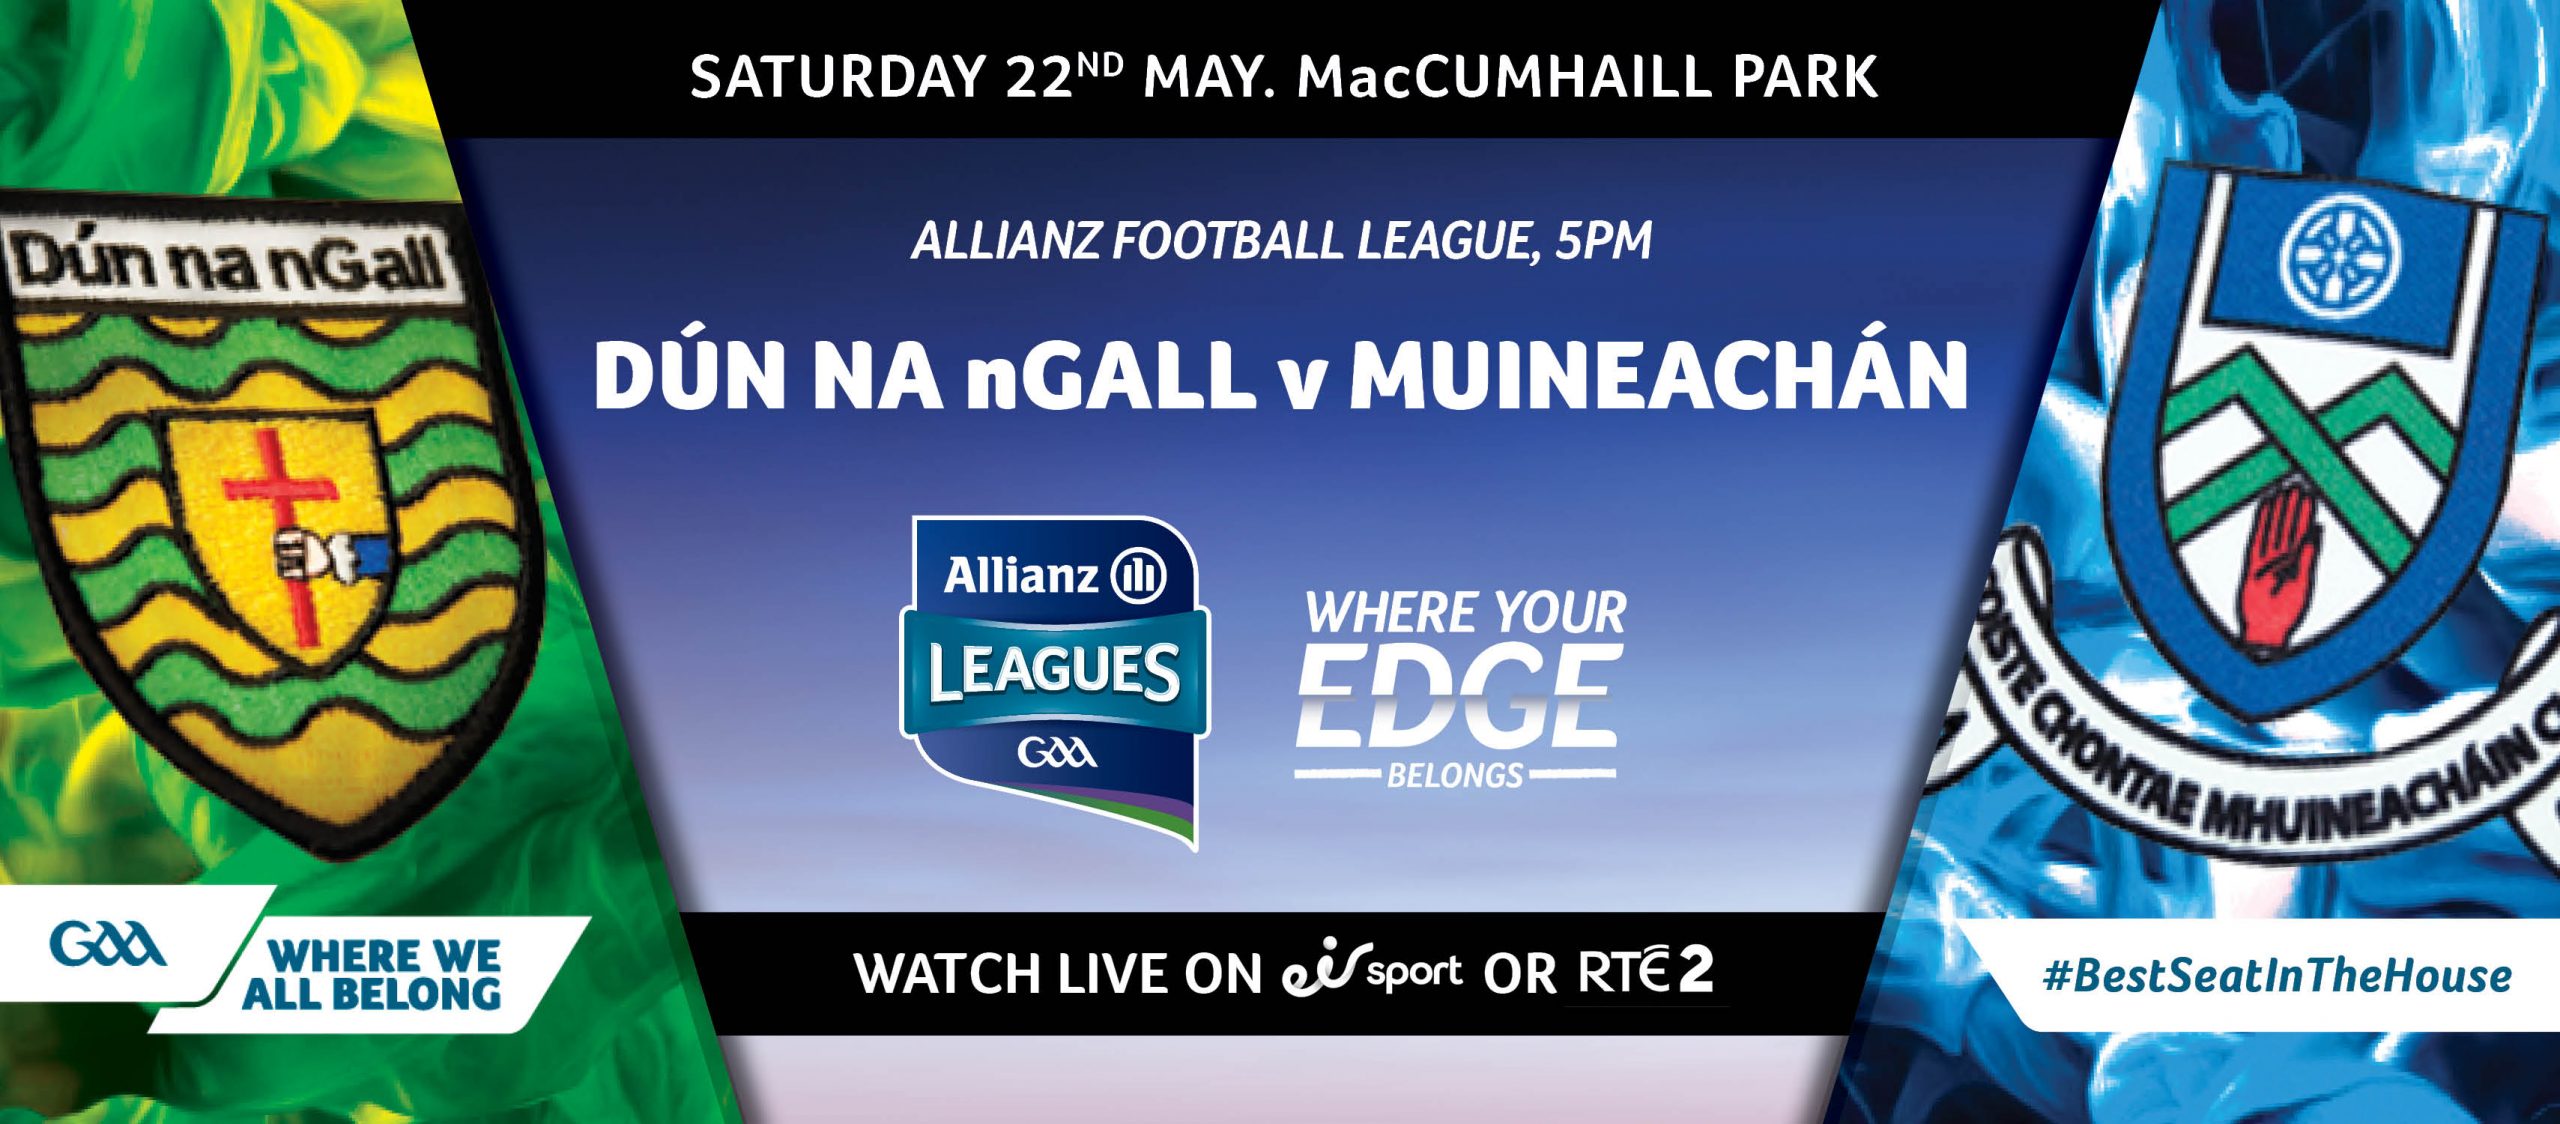 Good Luck to the Monaghan GAA Senior Football Team and Management today